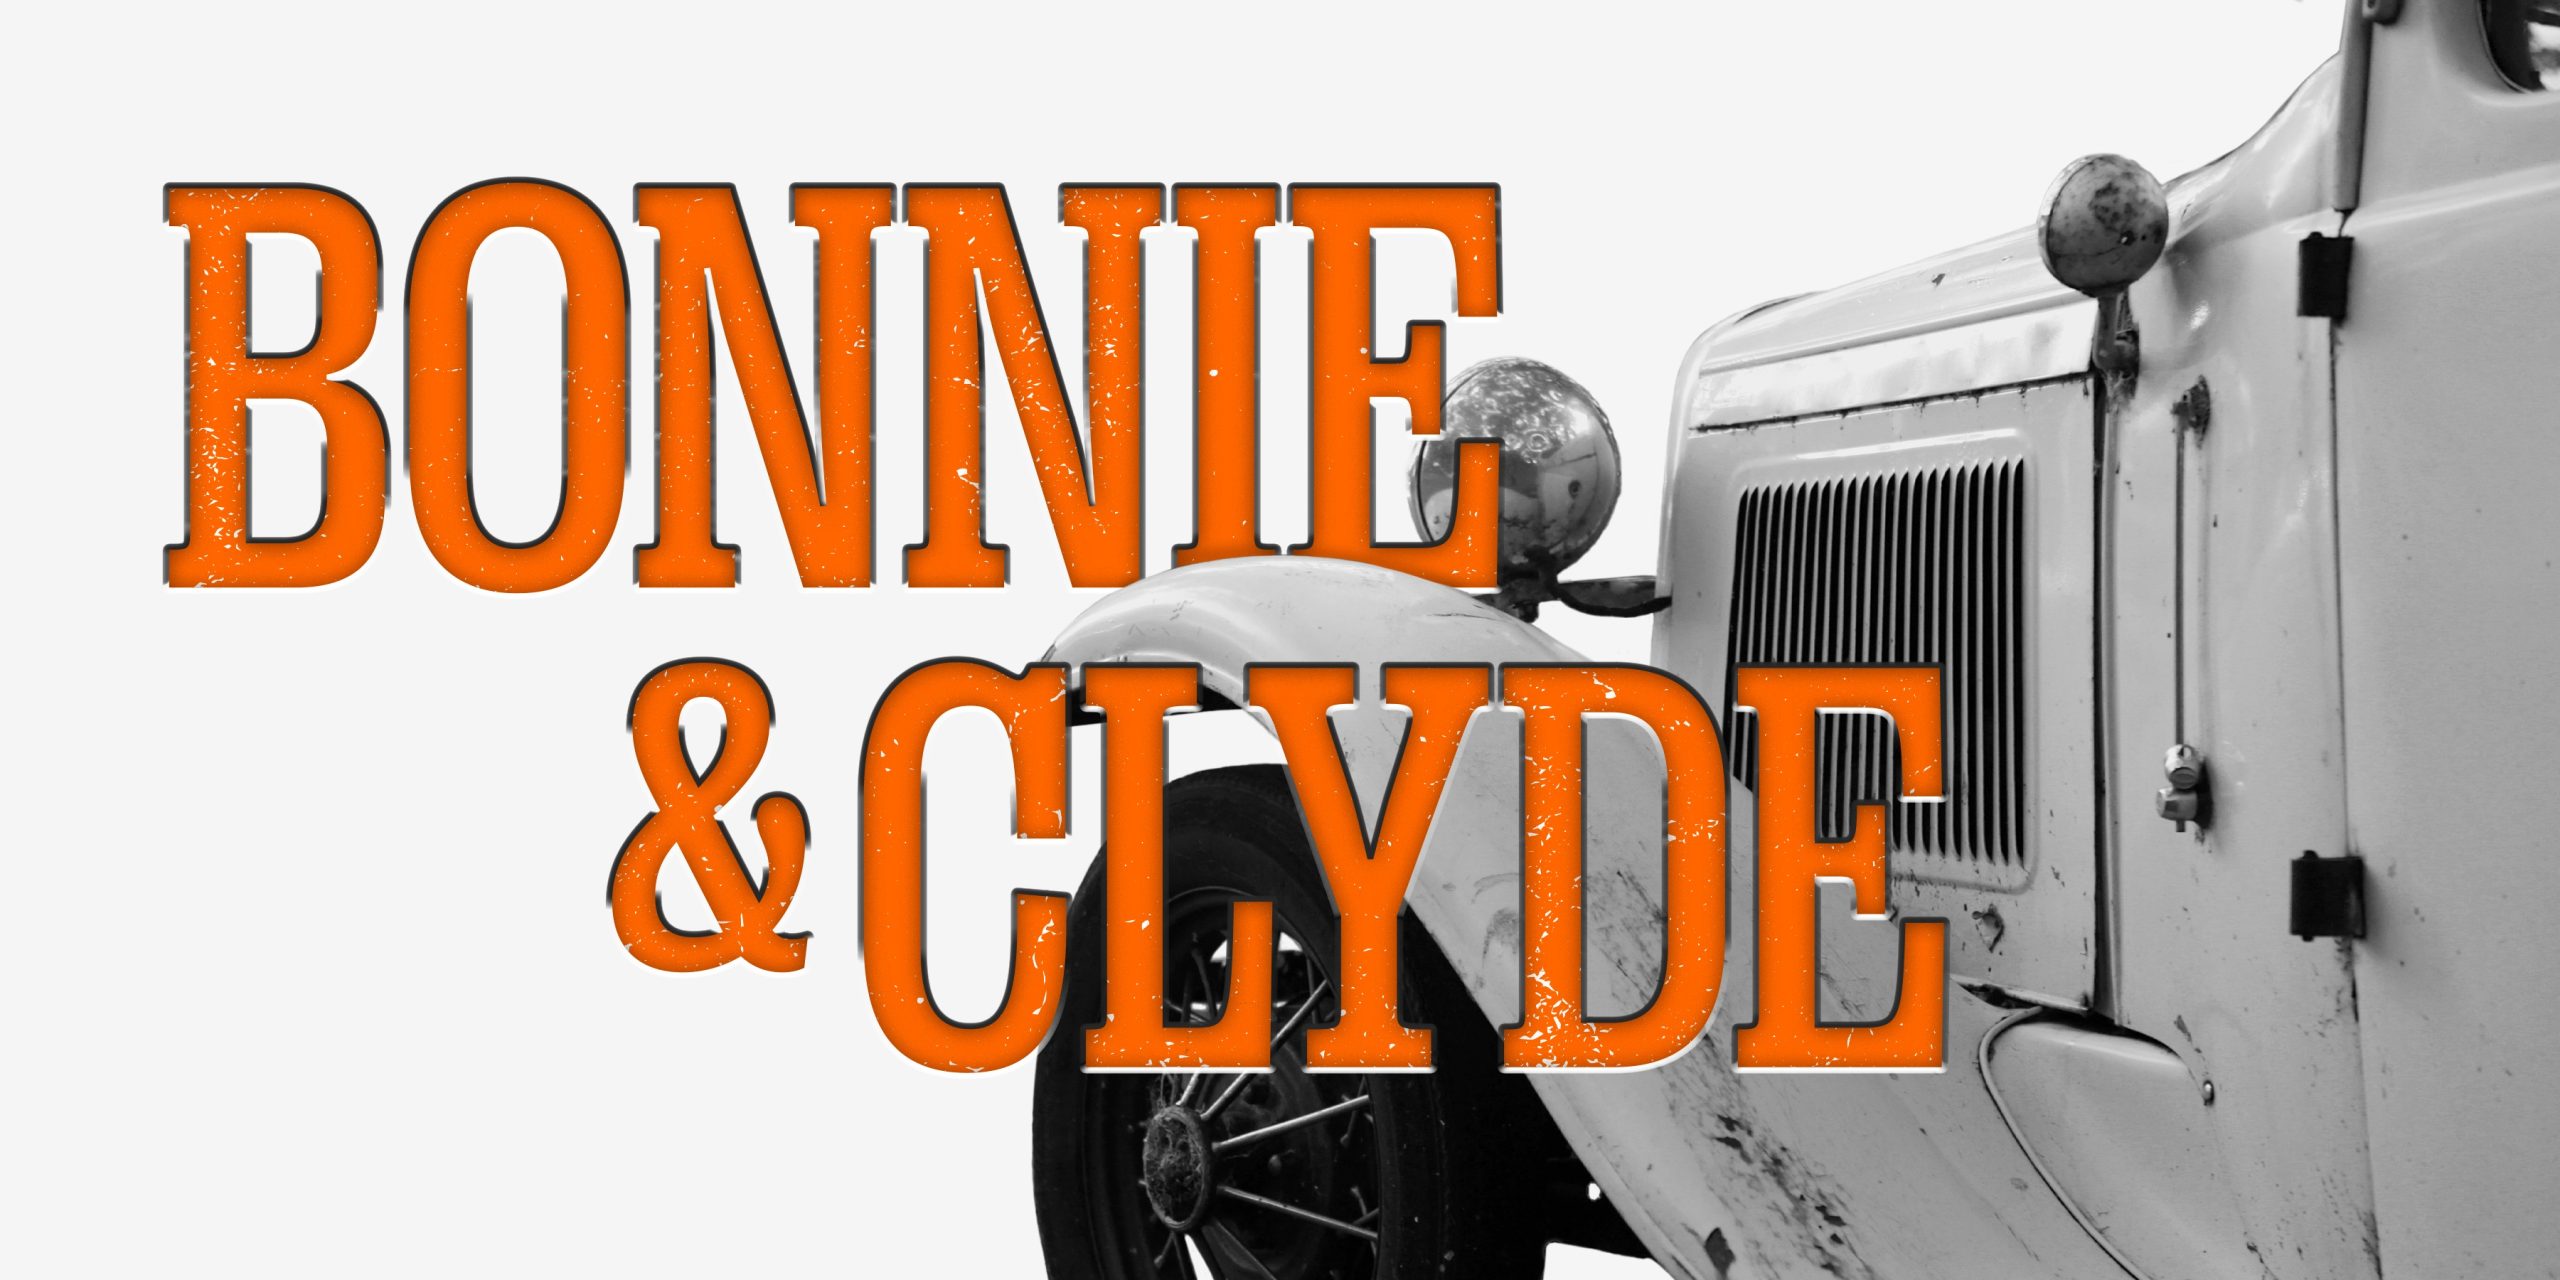 Ivan Menchell on Bonnie & Clyde - Aspects of History